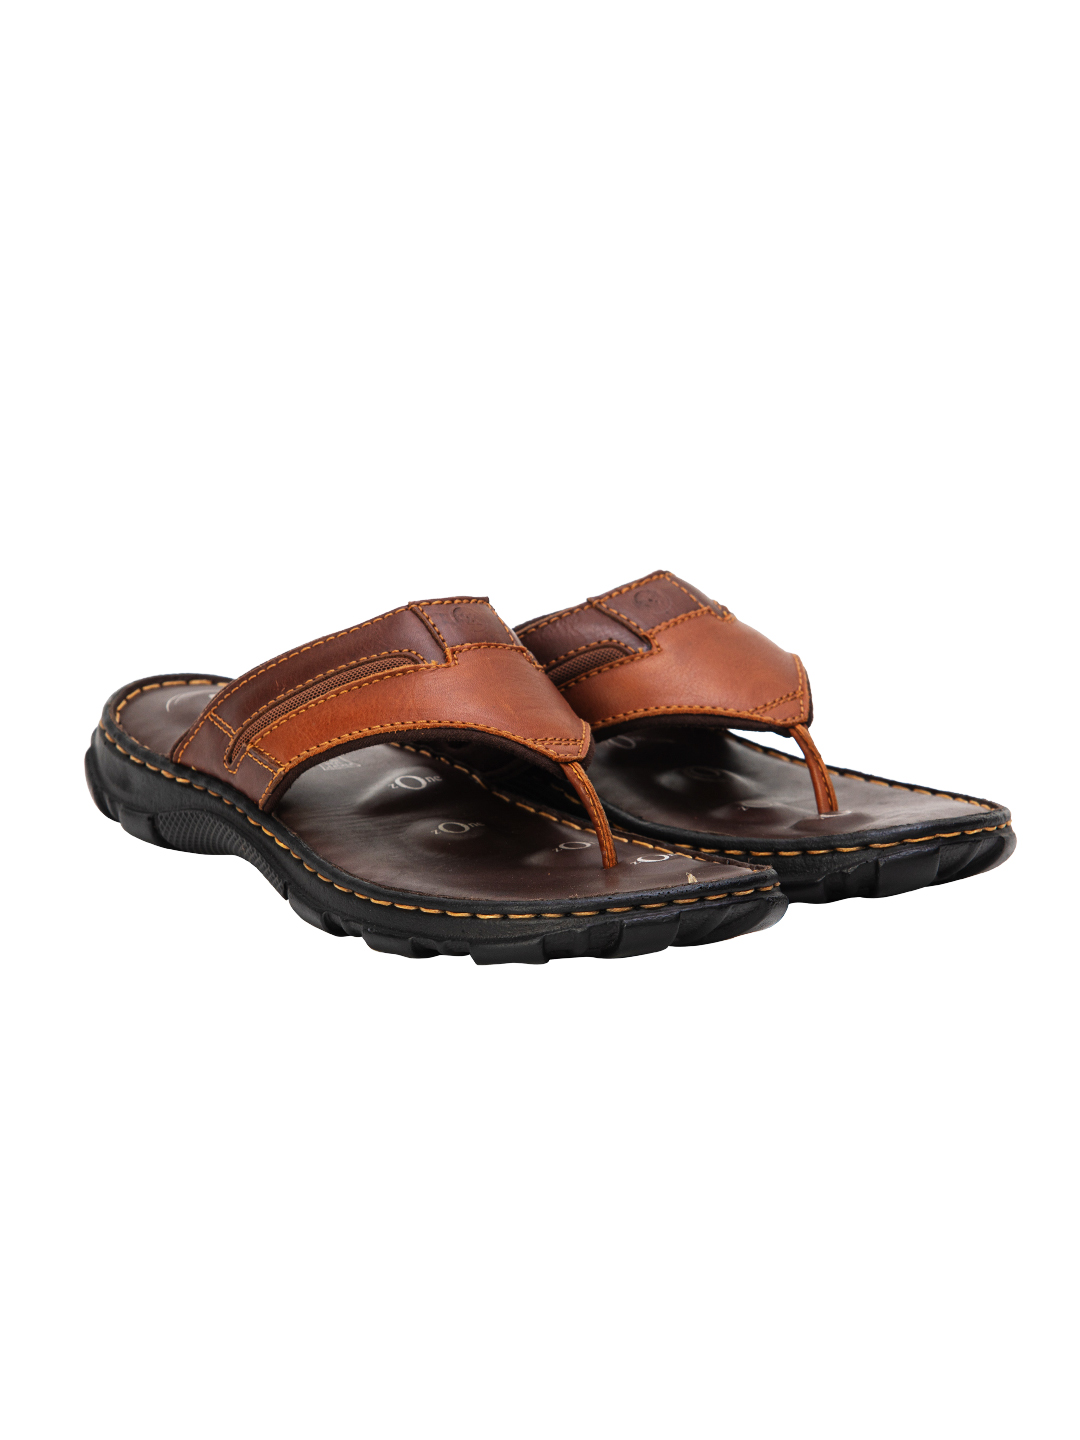 Buy Von Wellx Germany Comfort Brown Colton Slippers Online in Ahmedabad